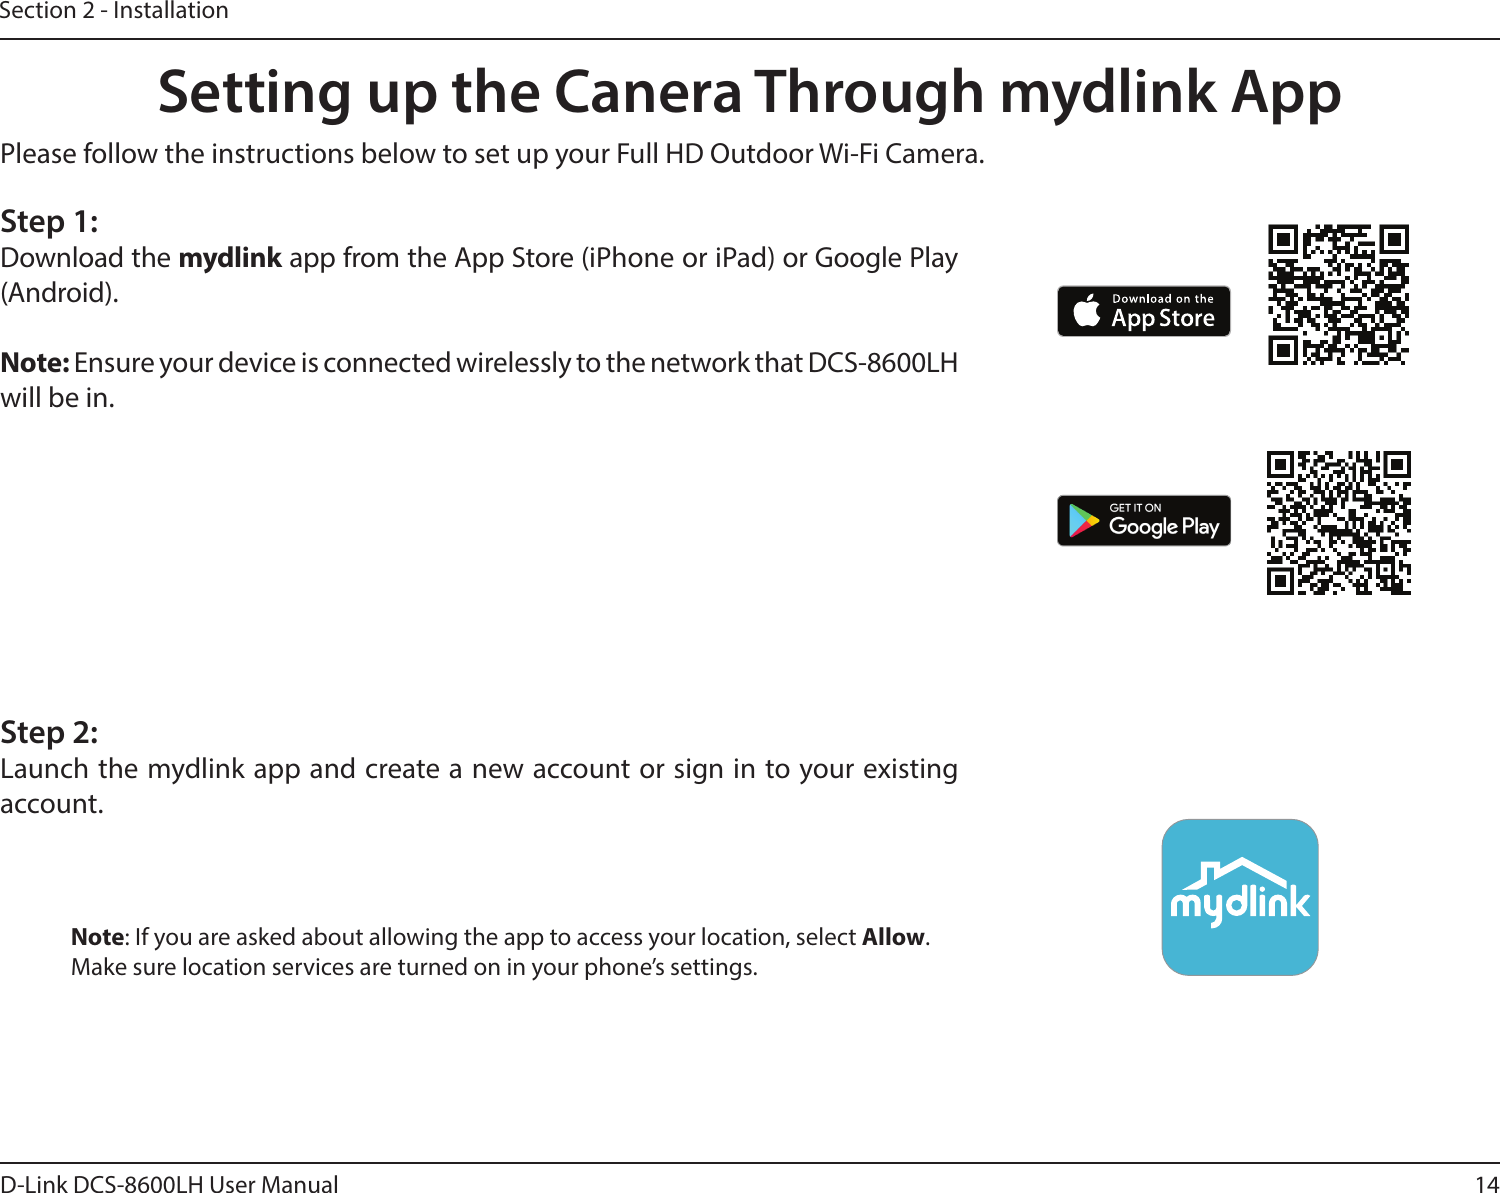 14D-Link DCS-8600LH User ManualSection 2 - InstallationSetting up the Canera Through mydlink AppNote: If you are asked about allowing the app to access your location, select Allow.Make sure location services are turned on in your phone’s settings.Please follow the instructions below to set up your Full HD Outdoor Wi-Fi Camera.Step 1:Download the mydlink app from the App Store (iPhone or iPad) or Google Play (Android).Note: Ensure your device is connected wirelessly to the network that DCS-8600LH will be in.Step 2:Launch the mydlink app and create a new account or sign in to your existing account.